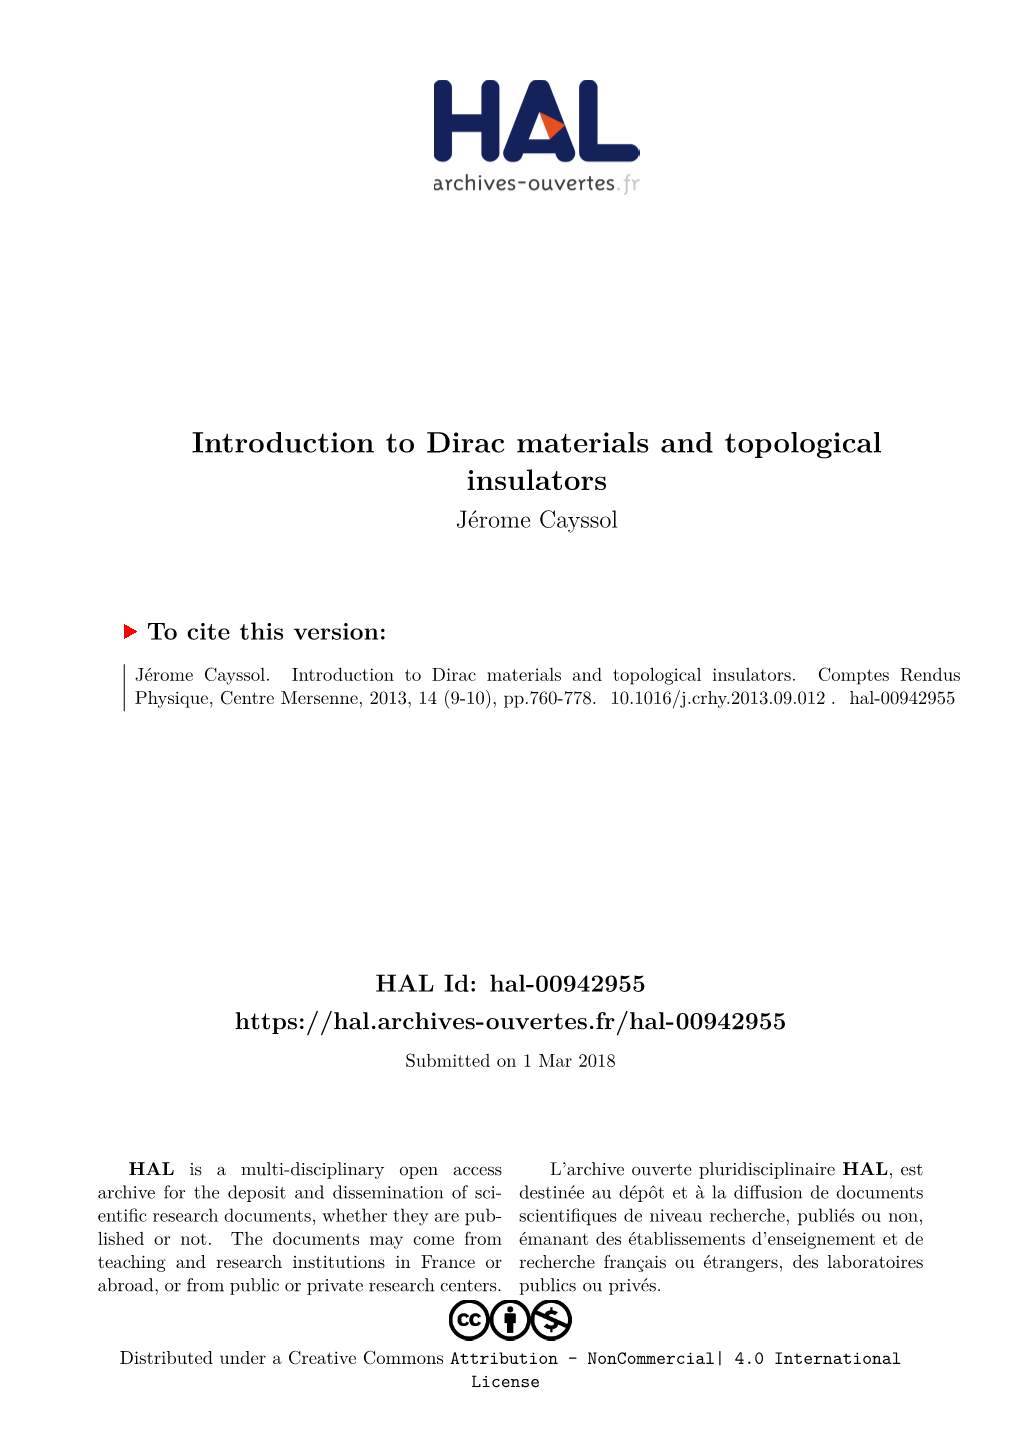 Introduction to Dirac Materials and Topological Insulators Jérome Cayssol